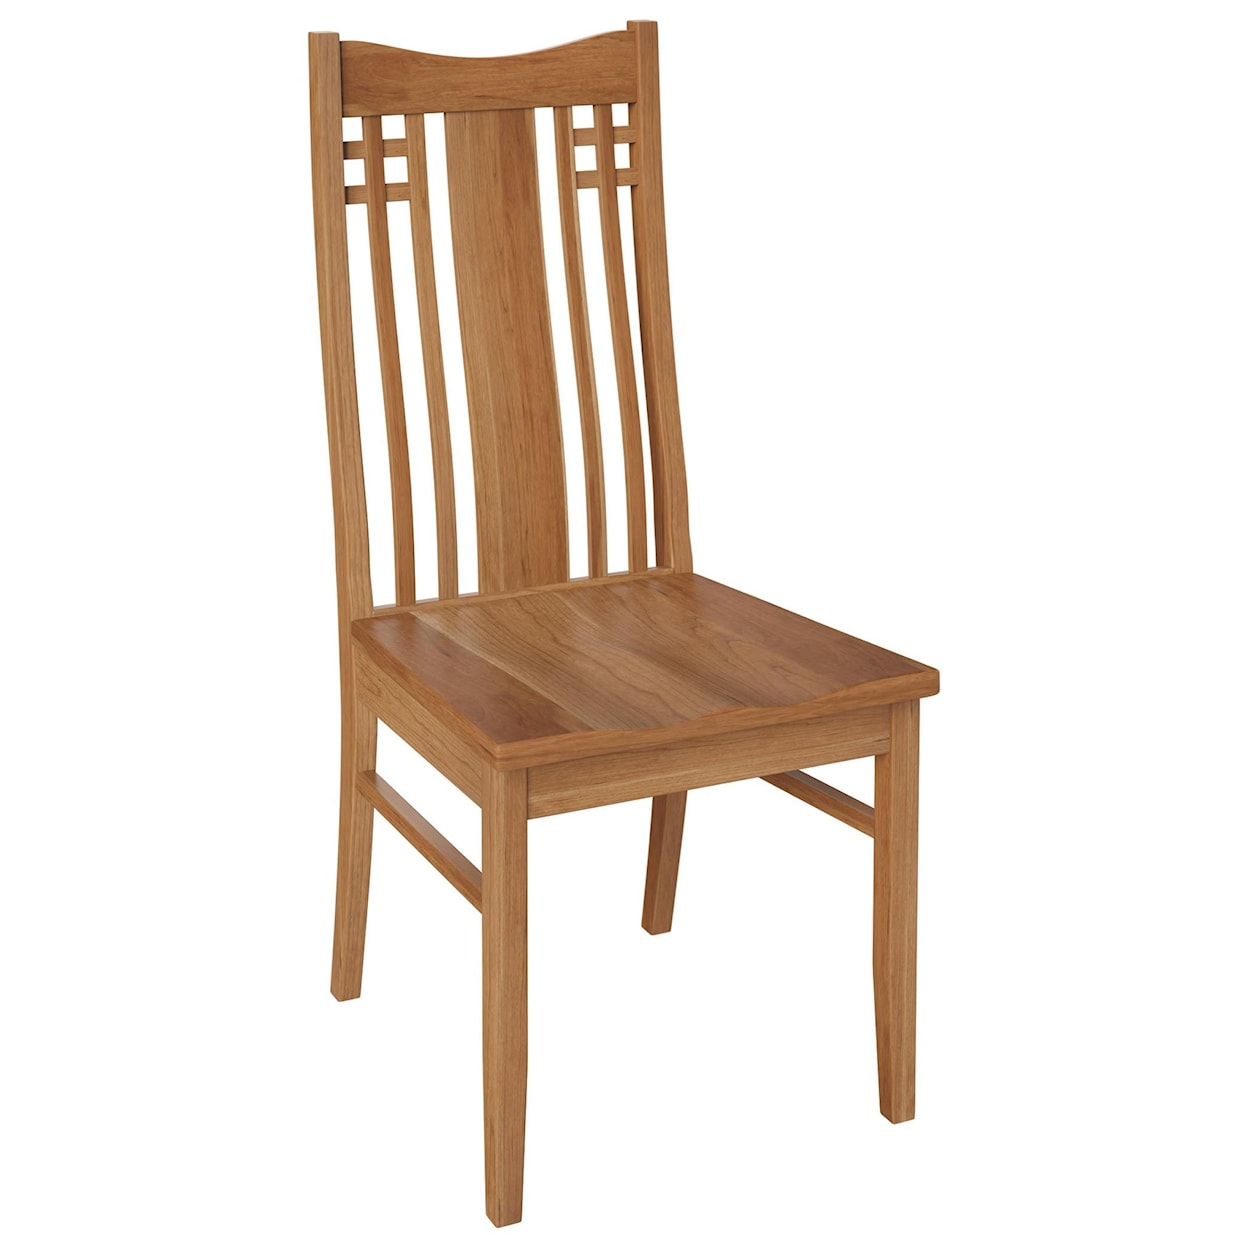 Wengerd Wood Products Peoria Side Chair